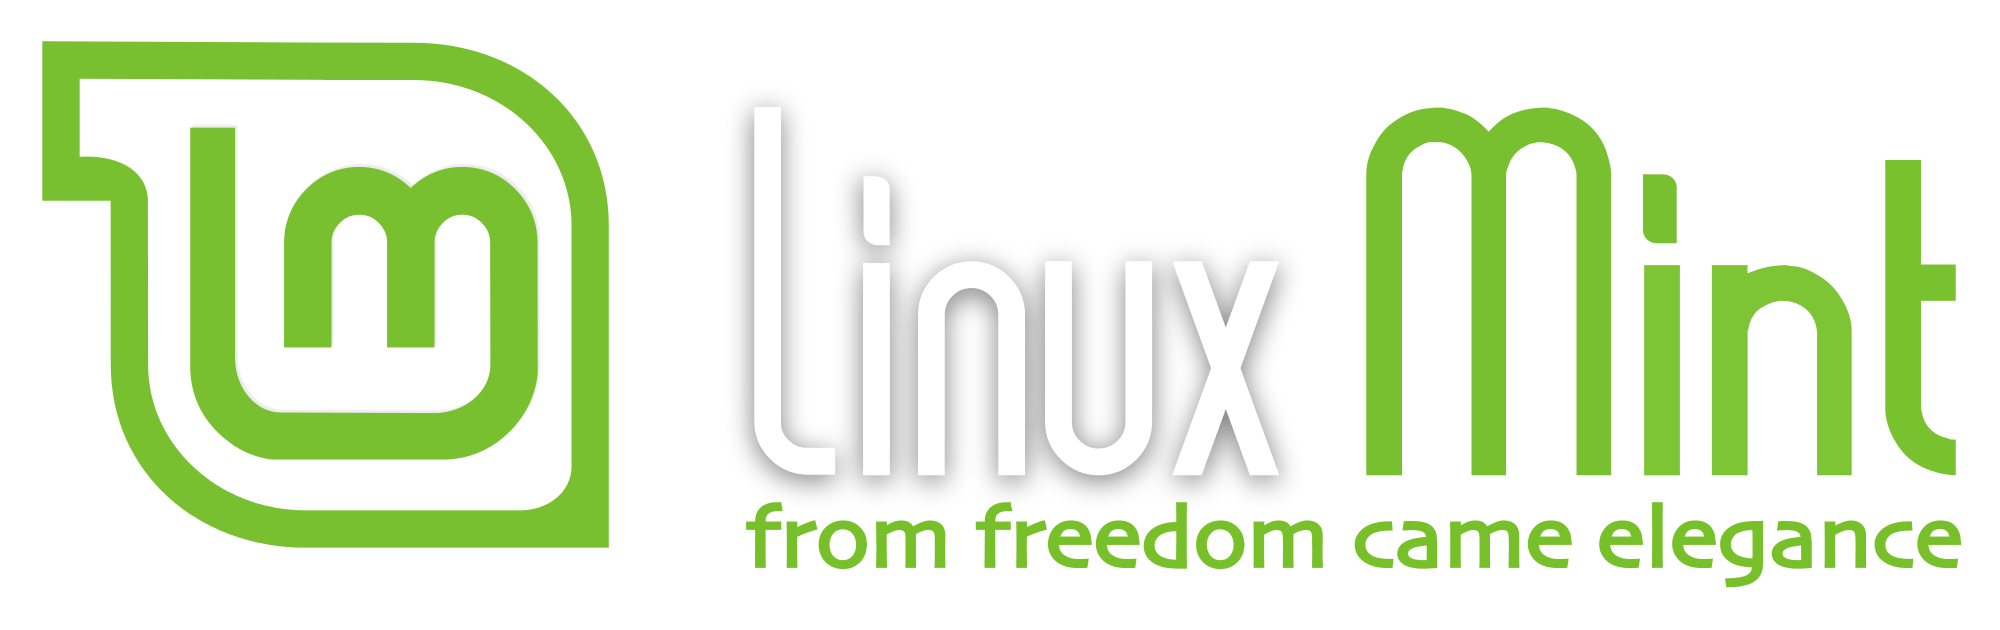 Mint Logo - File:Linux Mint logo submission.svg - Wikimedia Commons